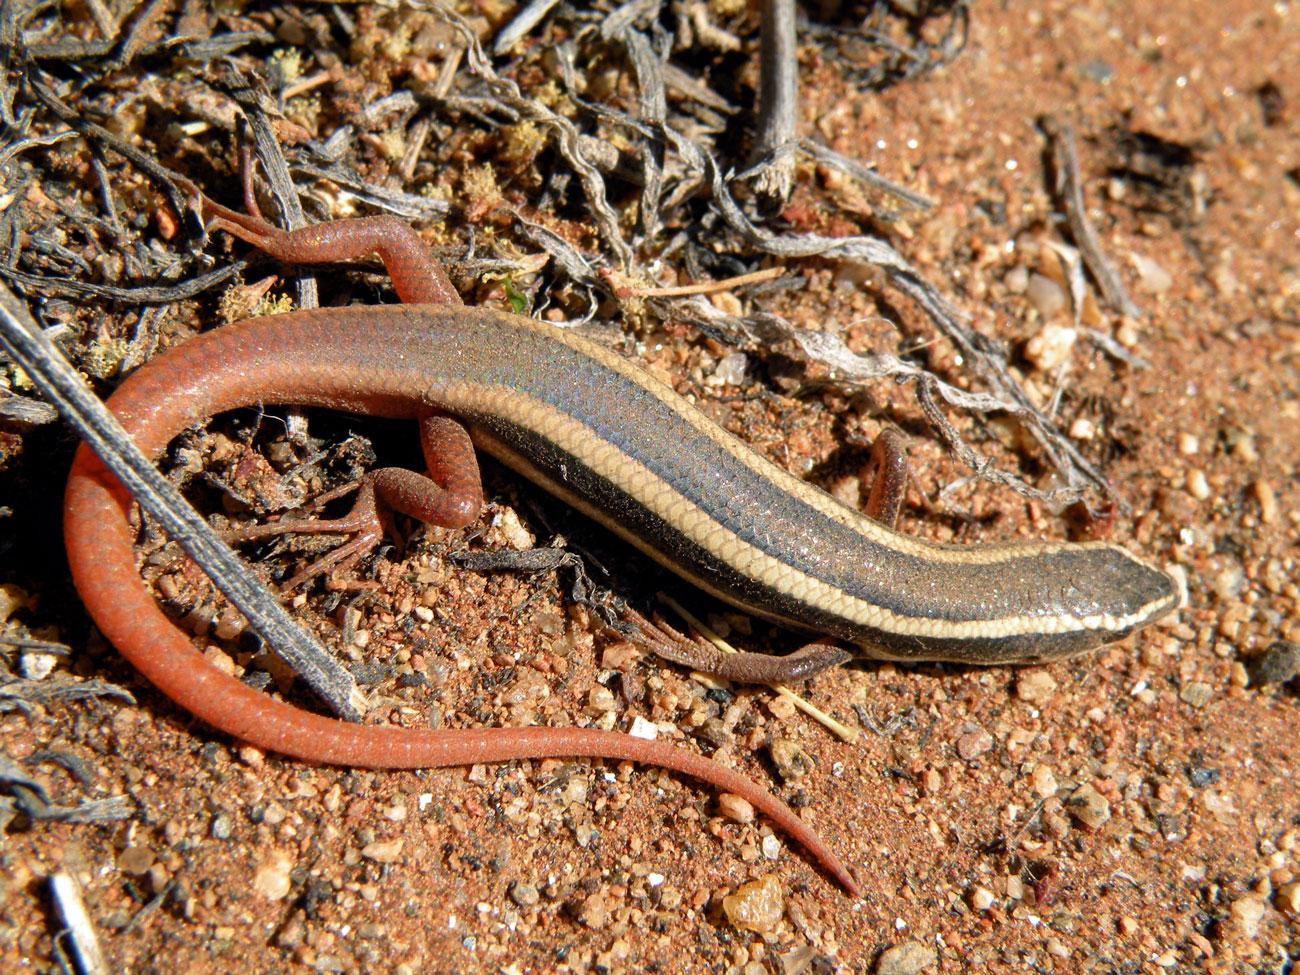 A fire-tailed skink at one of the the buffel removal sites. Christine Schlesinger, Author provided